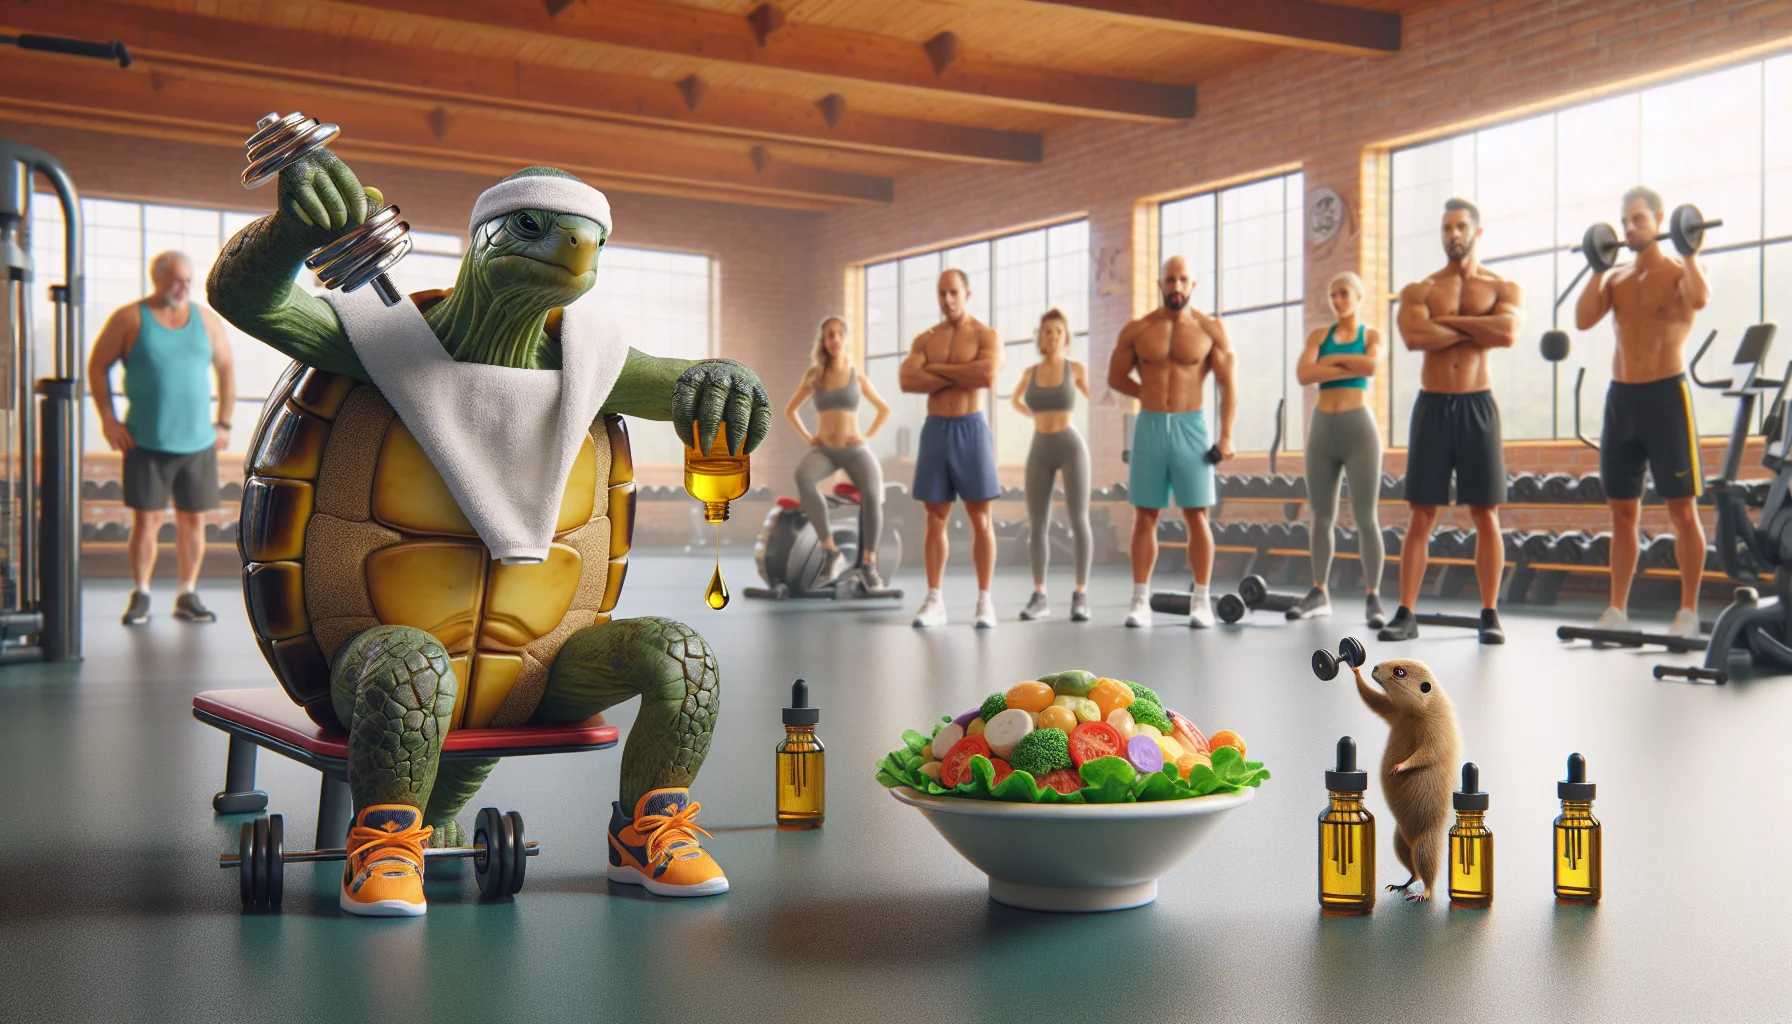 Generate a humorous, realistic image that depicts the concept of using CBD oil to enhance one's fitness and reduce anxiety. The scene takes place in a well-equipped, brightly lit gym. In the foreground, a fitness tortoise with a determined expression is working out with miniature weights, as a droplet of CBD oil is about to land on a mini salad next to him. Meanwhile, a crowd of various animals watches in awe, some wearing gym gear and demonstrating a variety of emotions from surprise, intrigue, amusement to awe. The setting should encapsulate a motivational and inviting atmosphere, encouraging fitness and peace of mind.